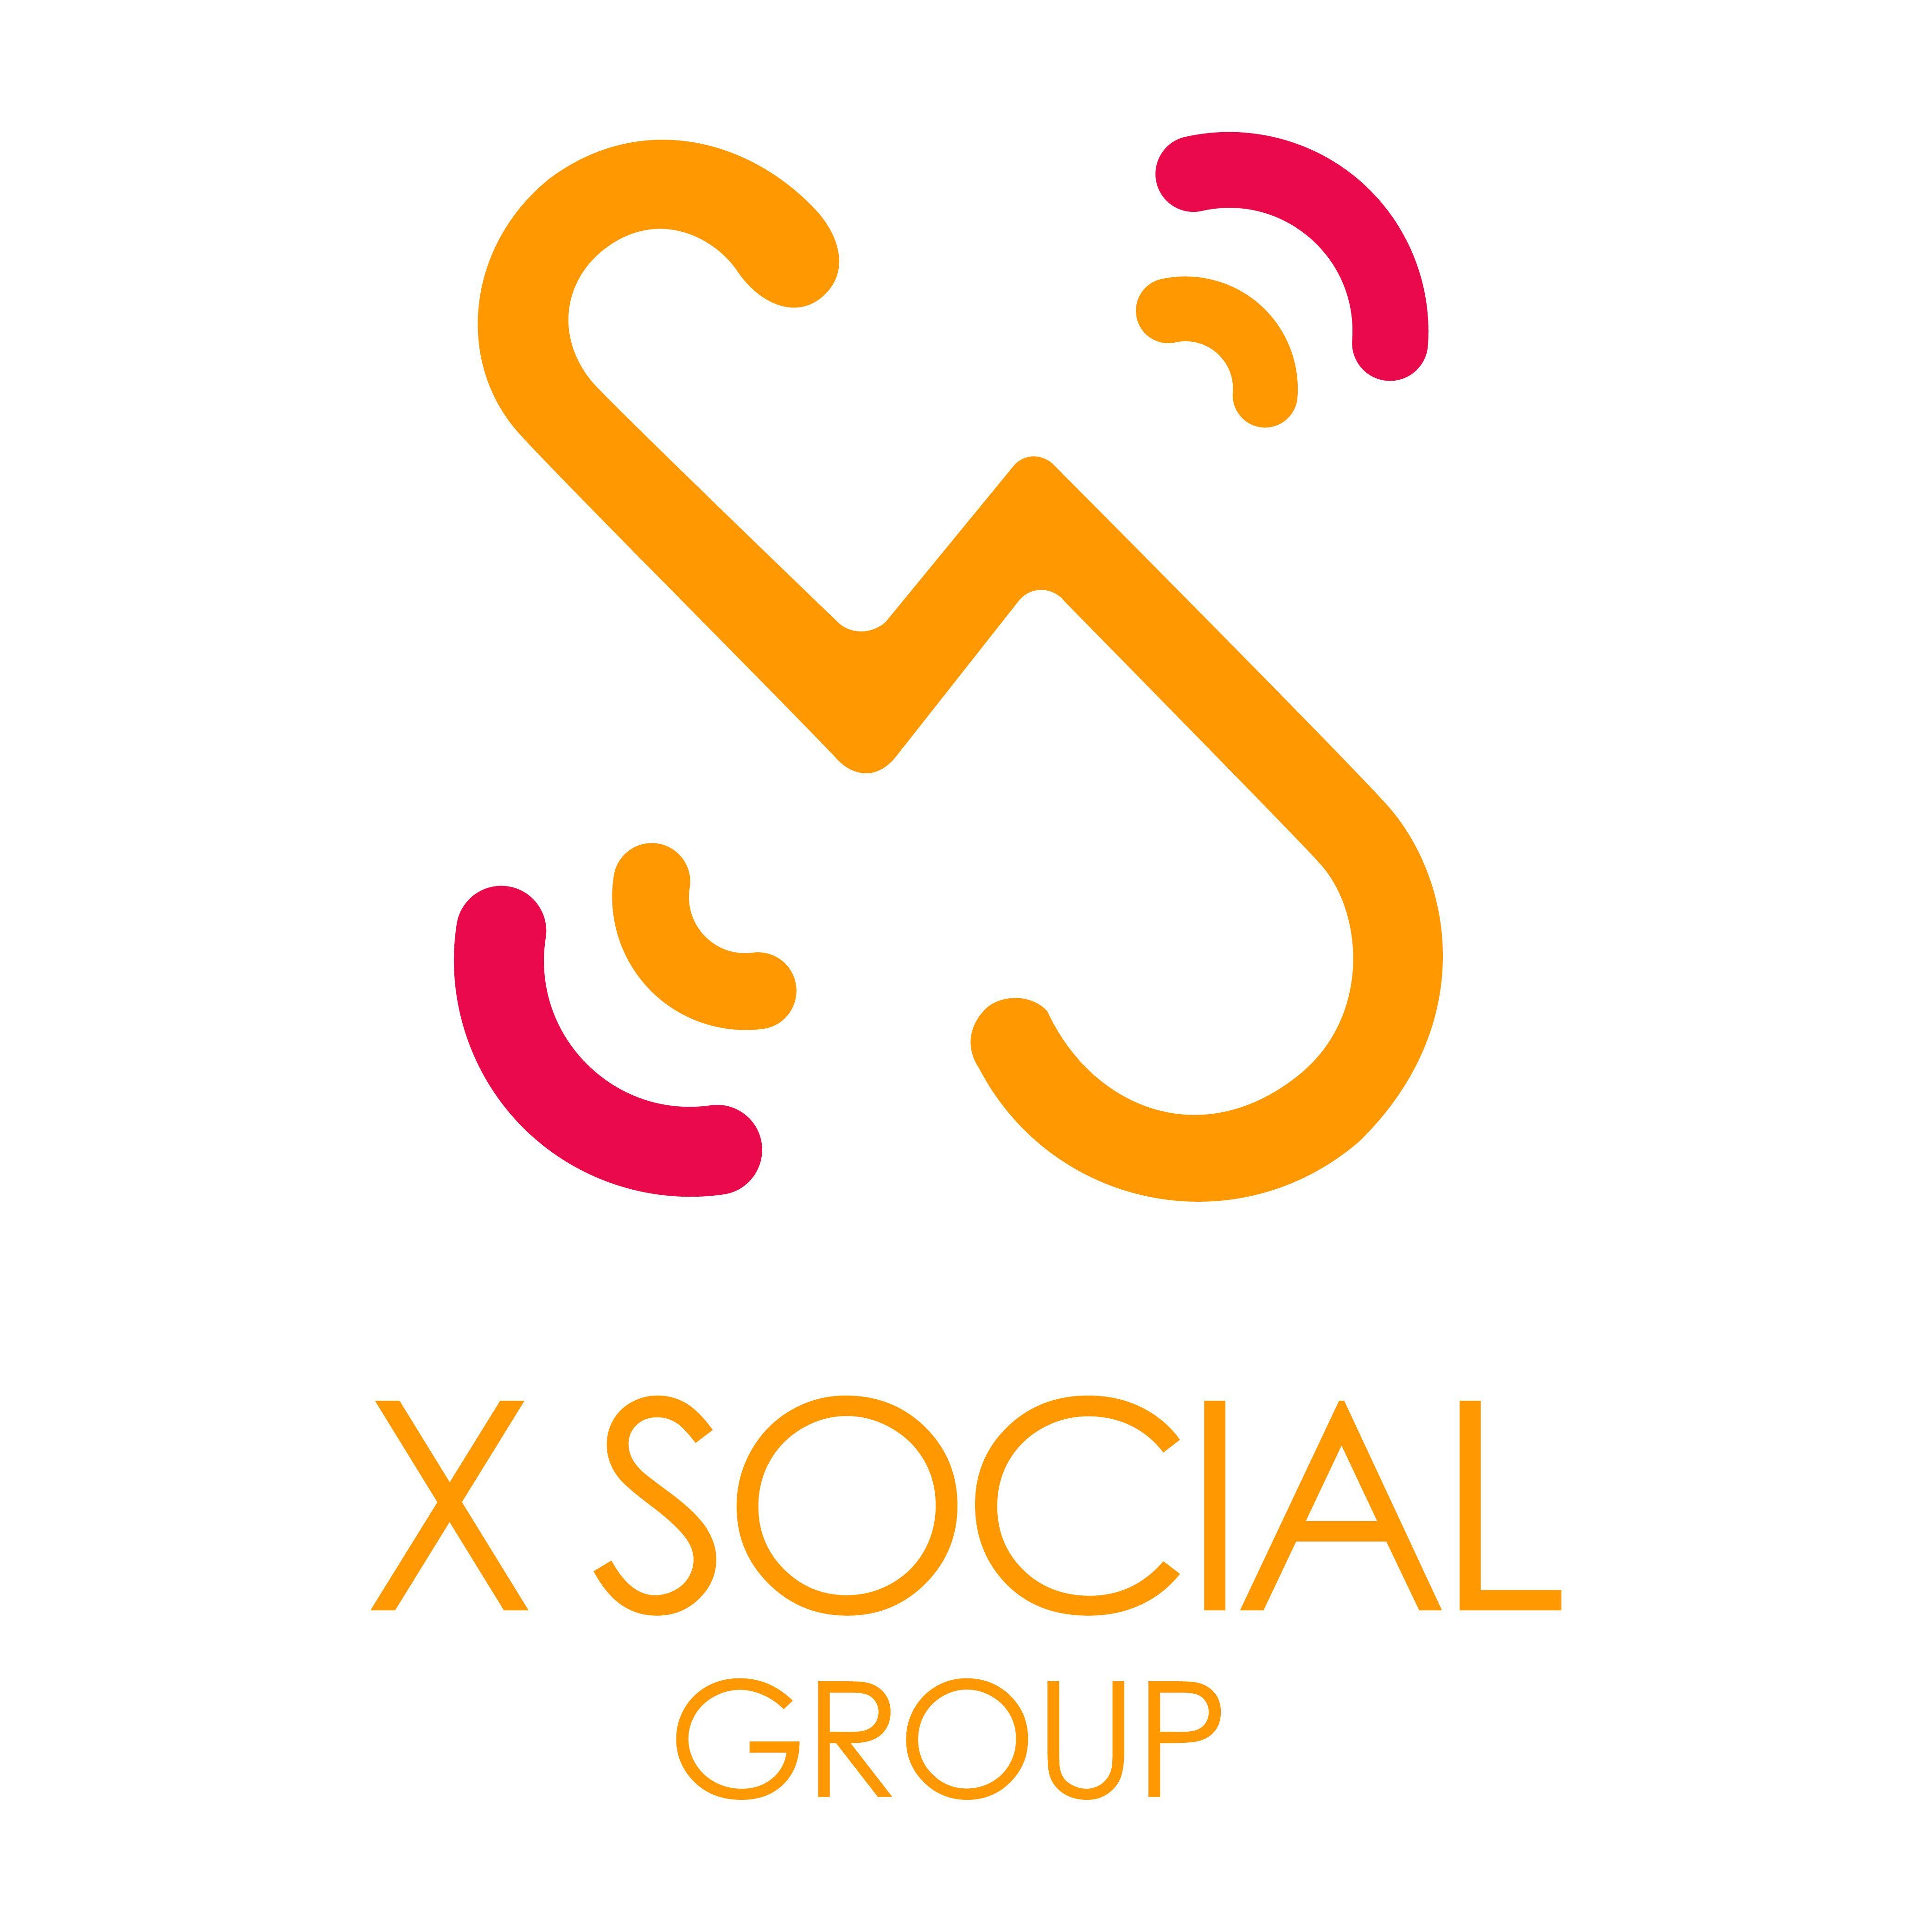 Social Group Logo - X Social Group Limited | The Association of Accredited Advertising ...